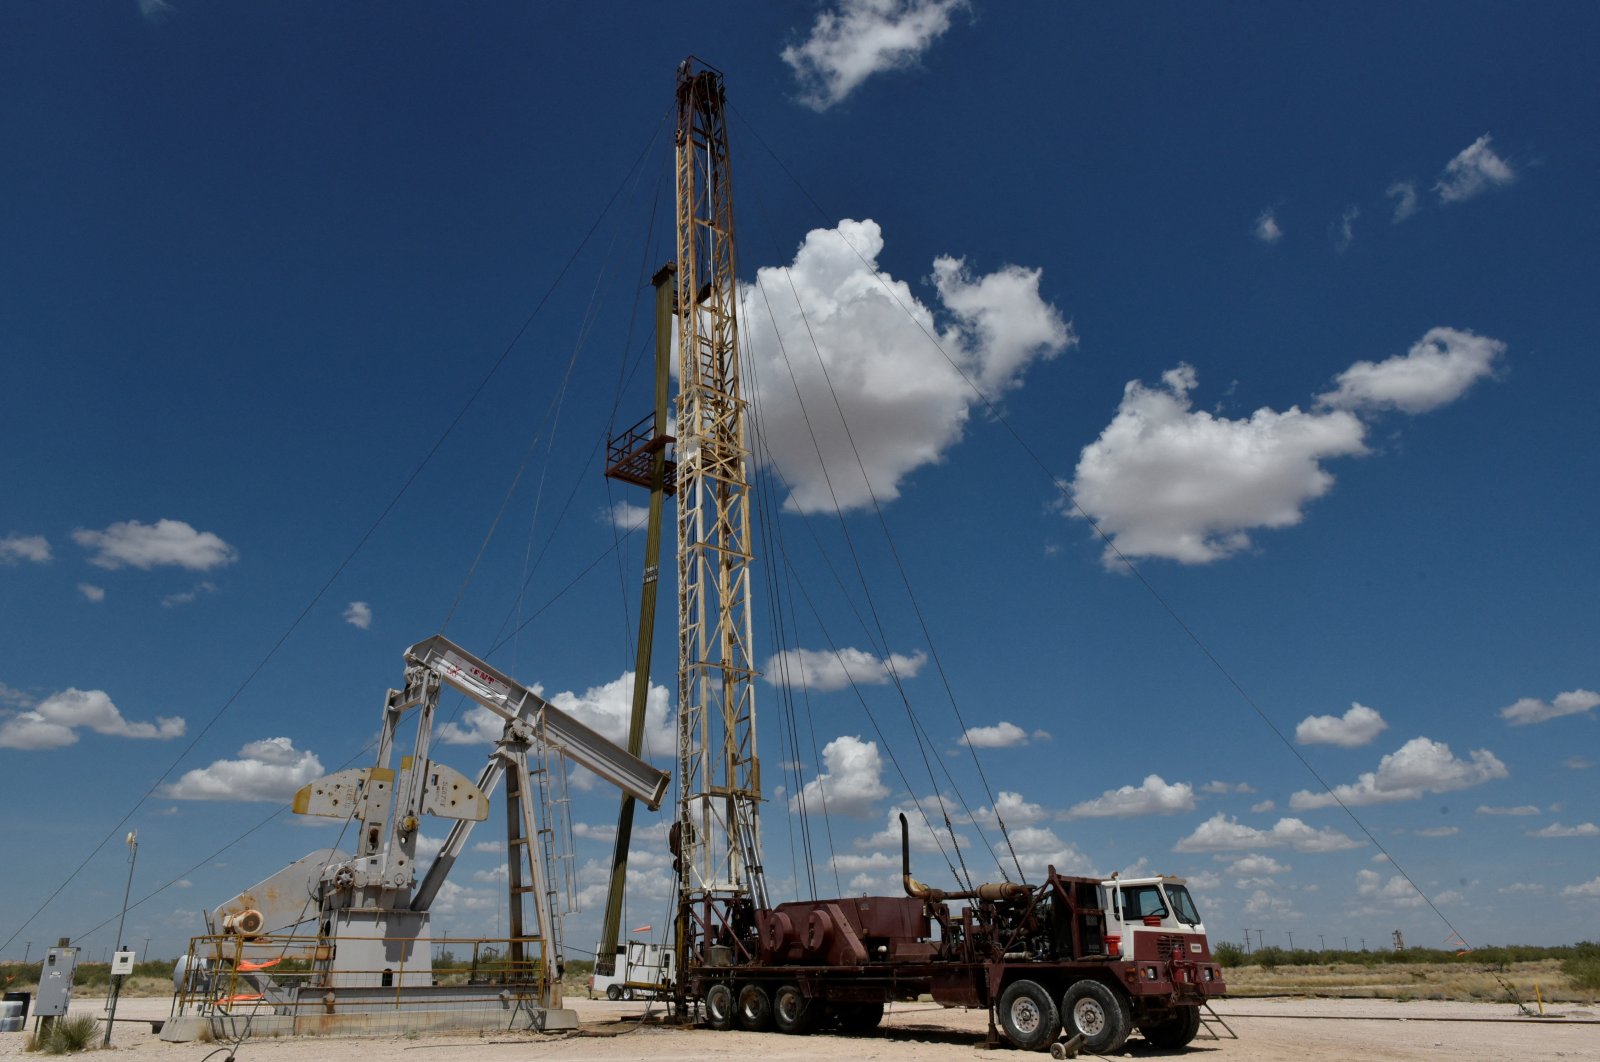 A work-over rig performs maintenance on an oil well in the Permian Basin oil production area near Wink, Texas, U.S., Aug. 22, 2018. (Reuters Photo)